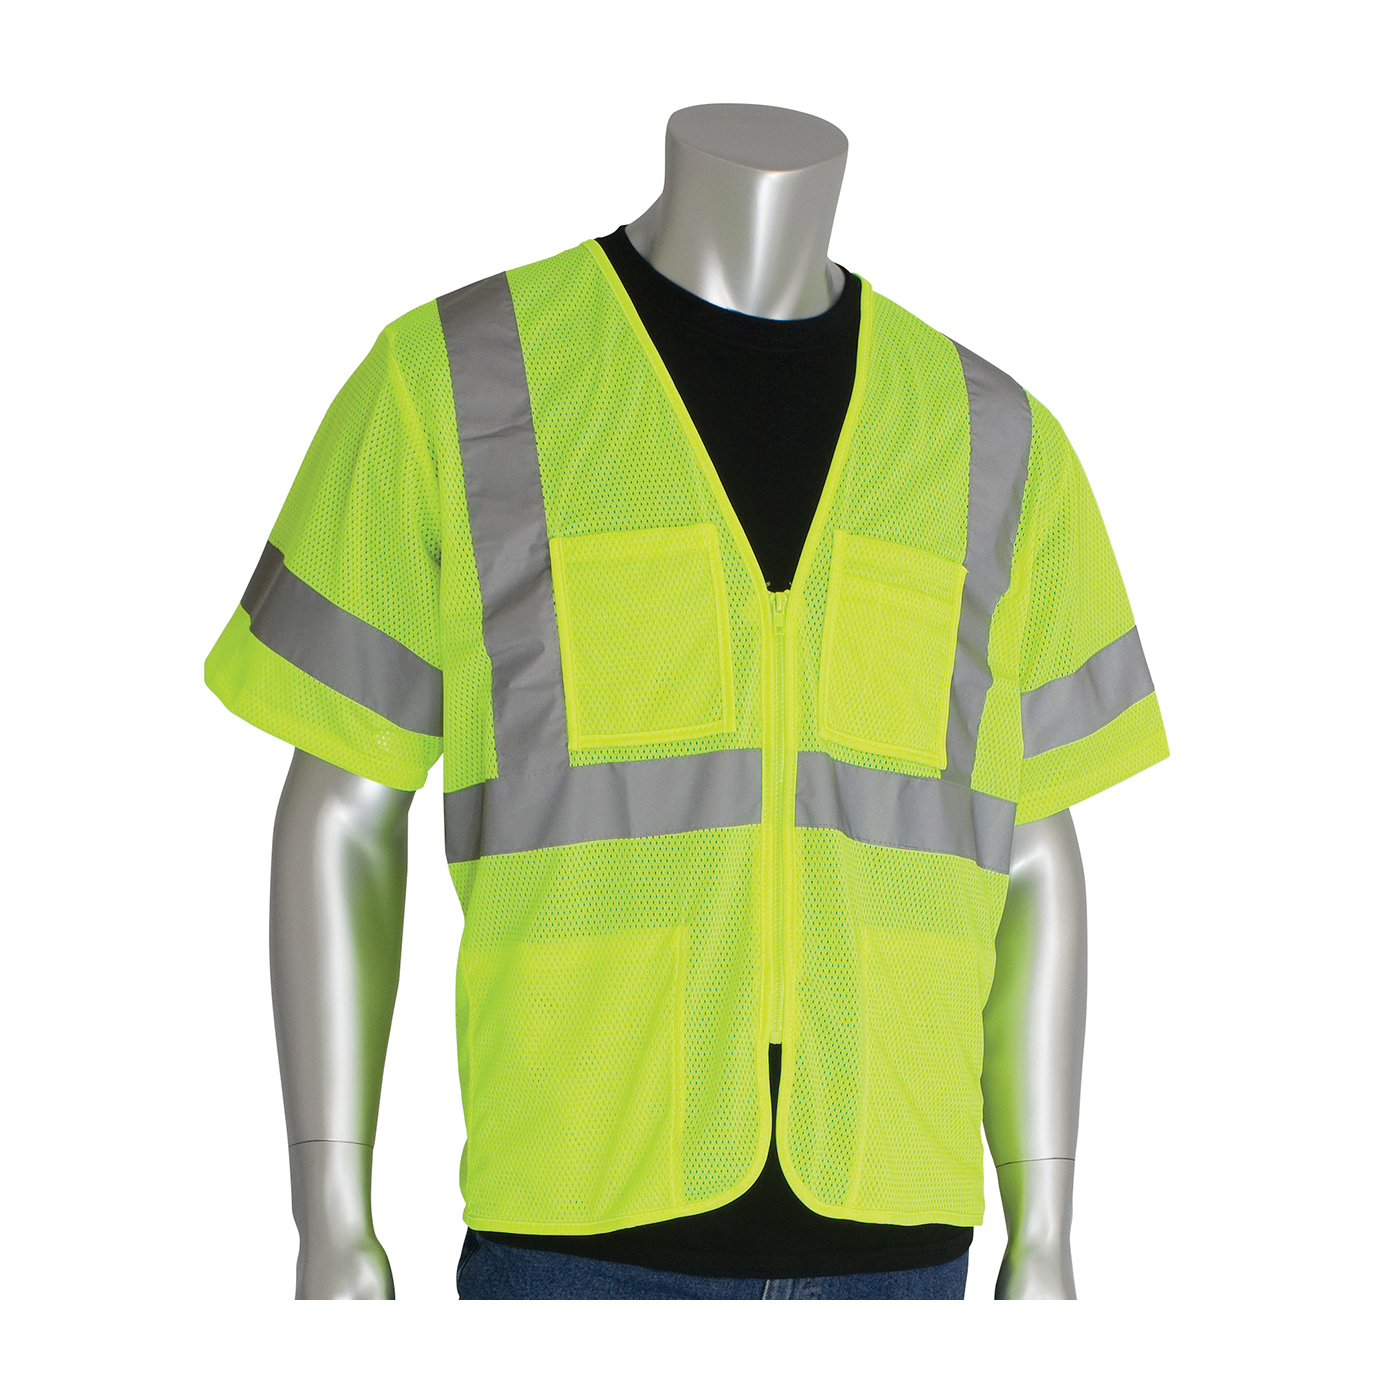 PIP® 303-MVGZ4P-LY/4X Safety Vest, 4XL, Hi-Viz Lime Yellow, Polyester Mesh, Zipper Closure, 4 Pockets, ANSI Class: Class 3, Specifications Met: ANSI 107 Type R